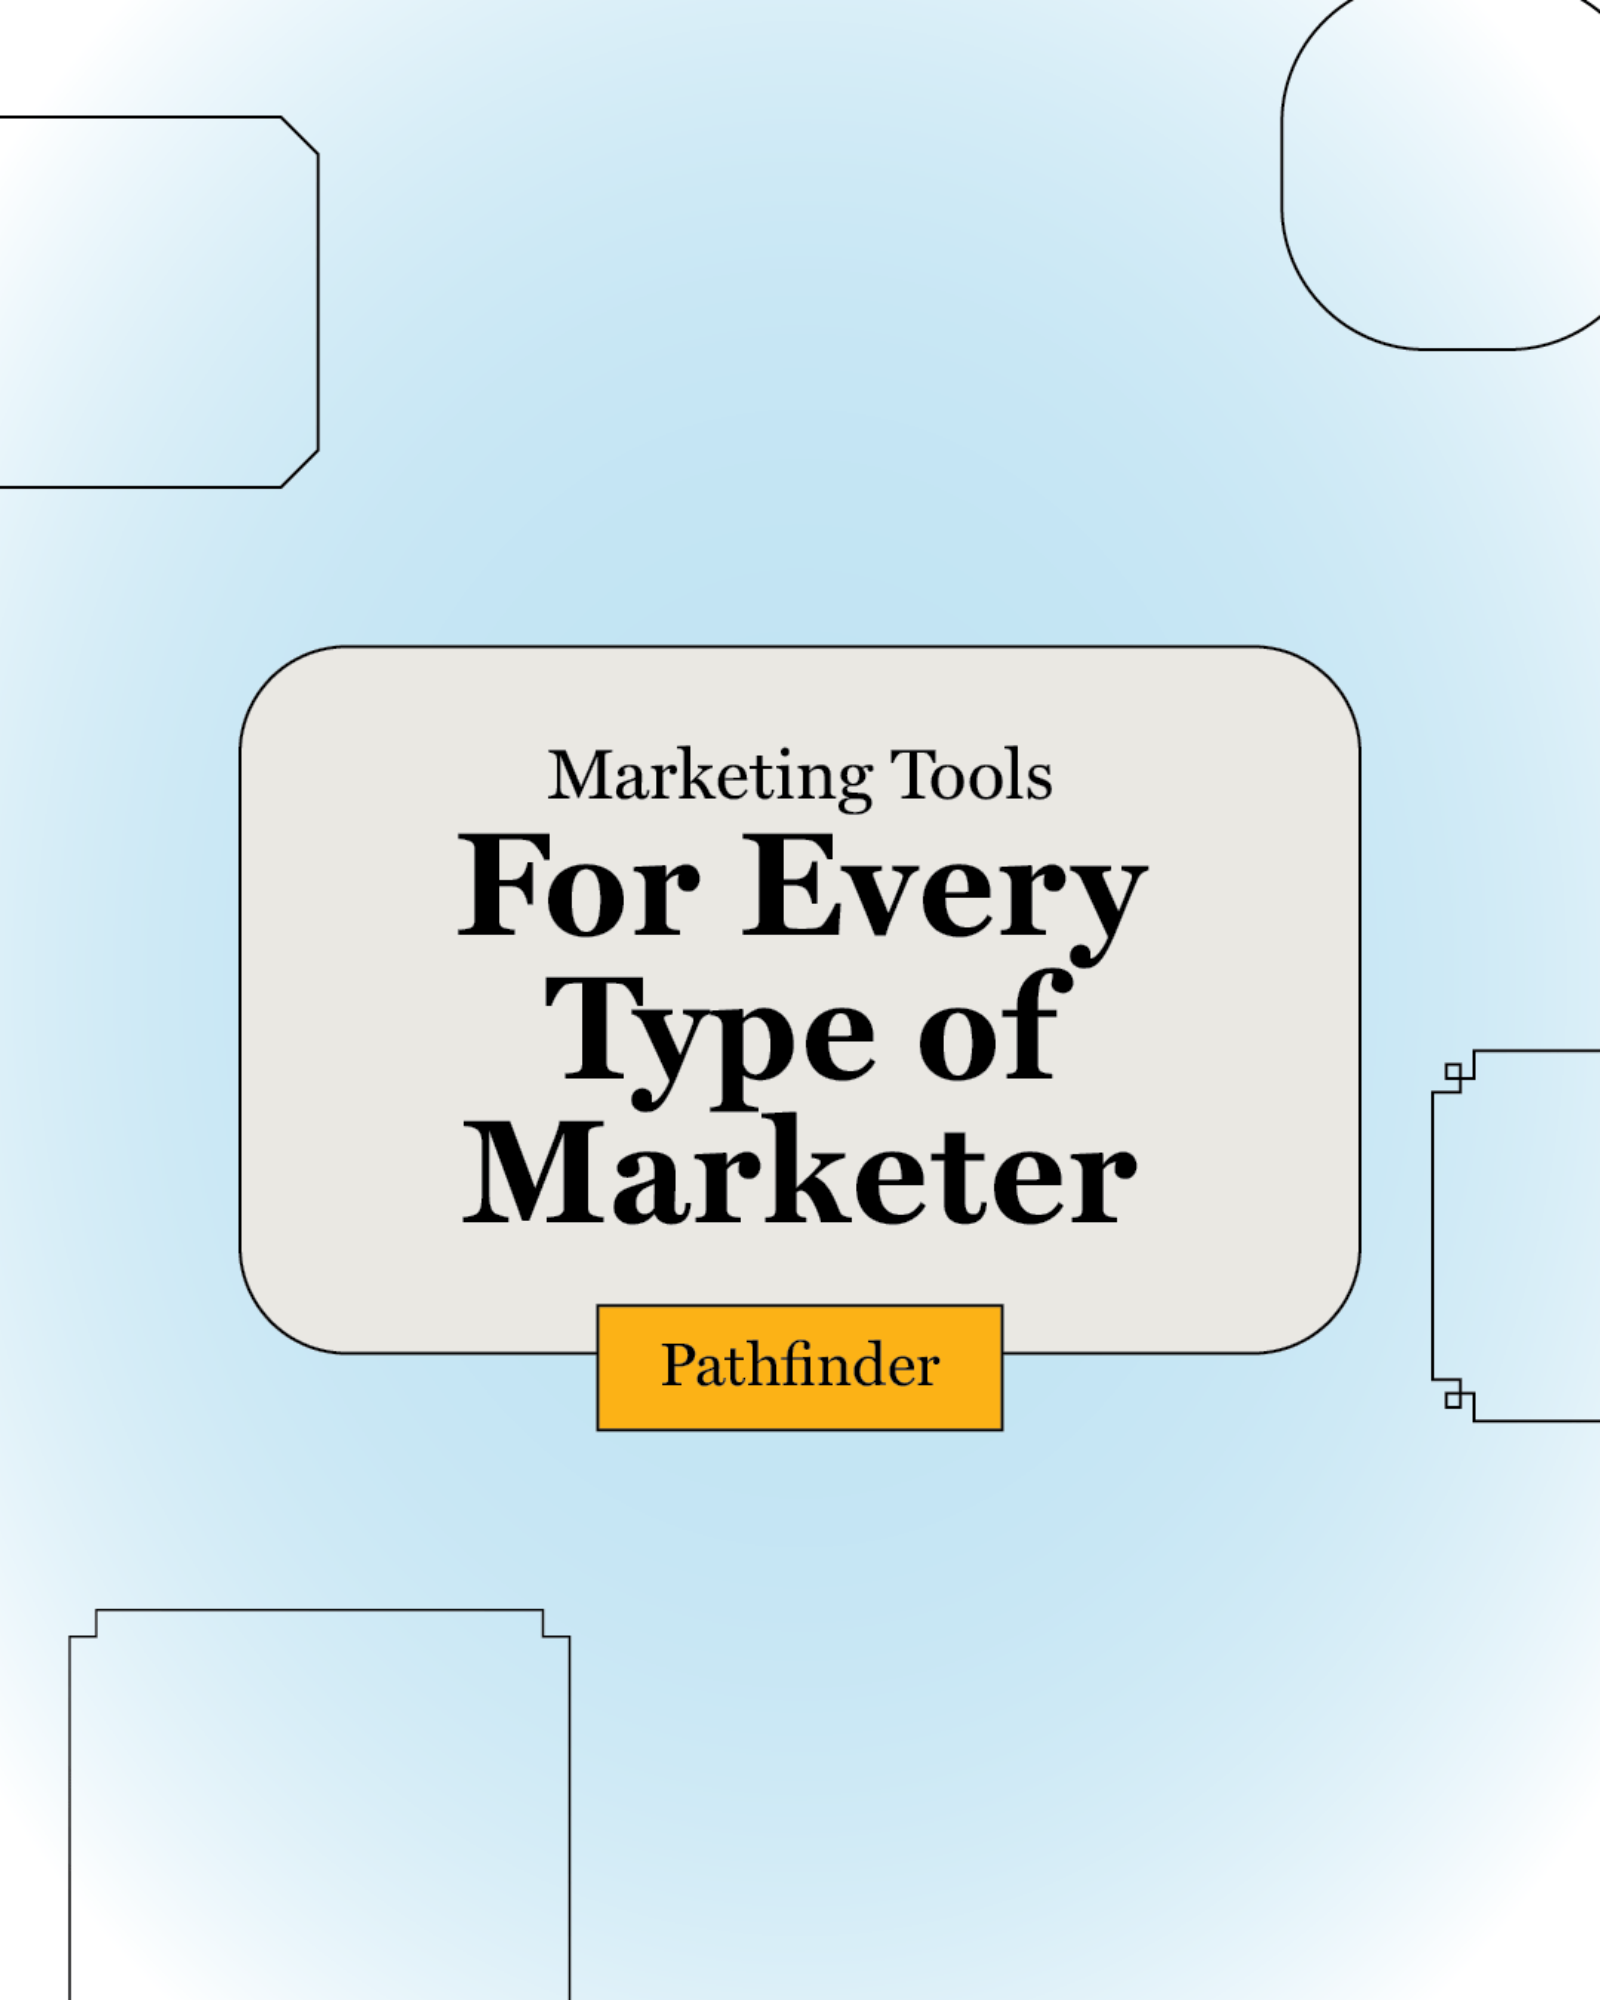 Marketing Tools For Every Type Of Marketer